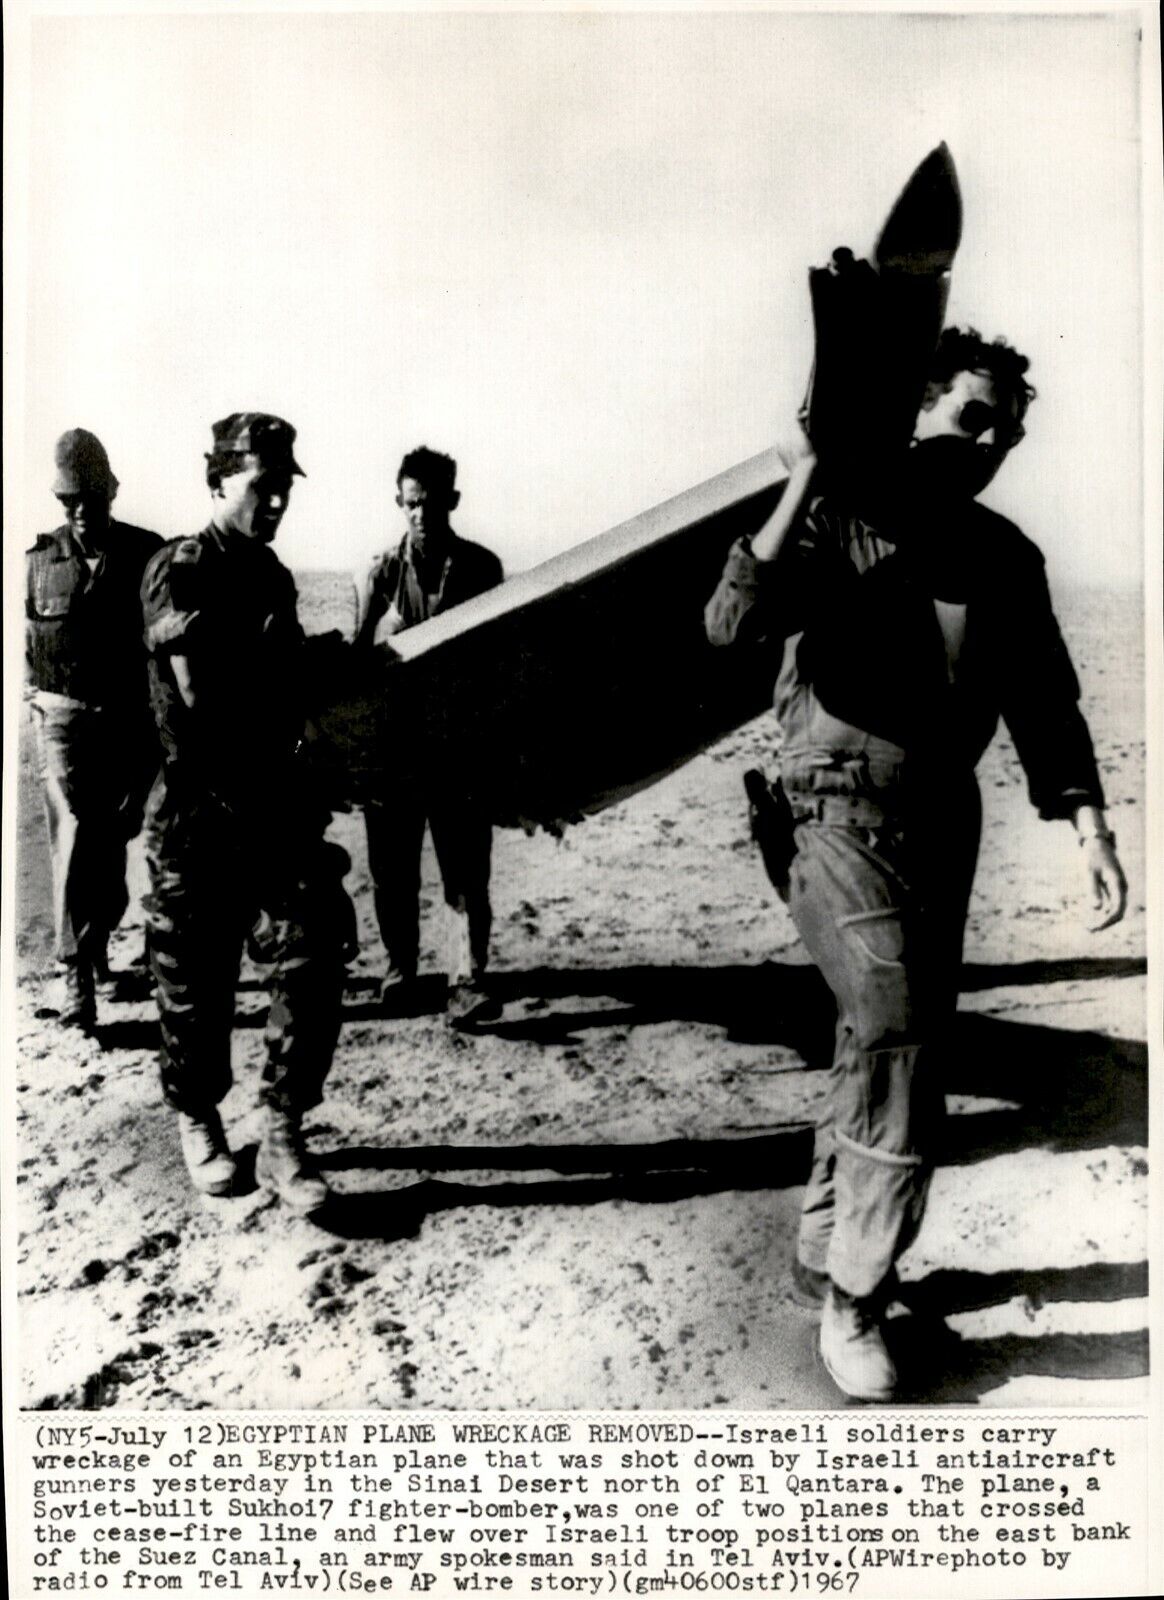 LG912 1967 AP Wire Photo EGYPTIAN PLANE WRECKAGE REMOVED ISRAELI ANTI-AIRCRAFT